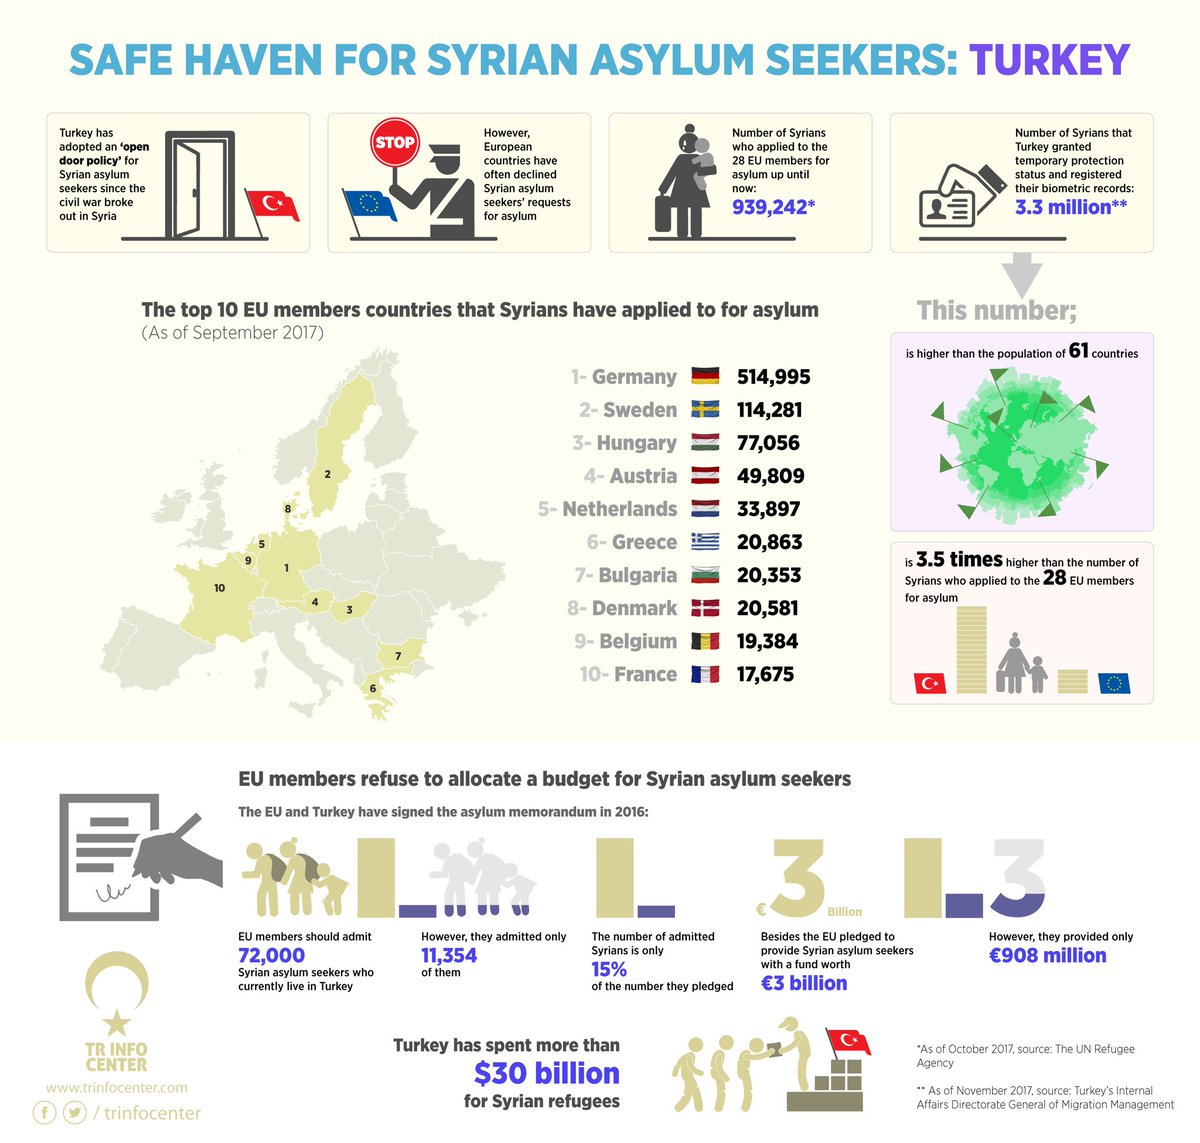 Safe haven for Syrian migrants: Turkey